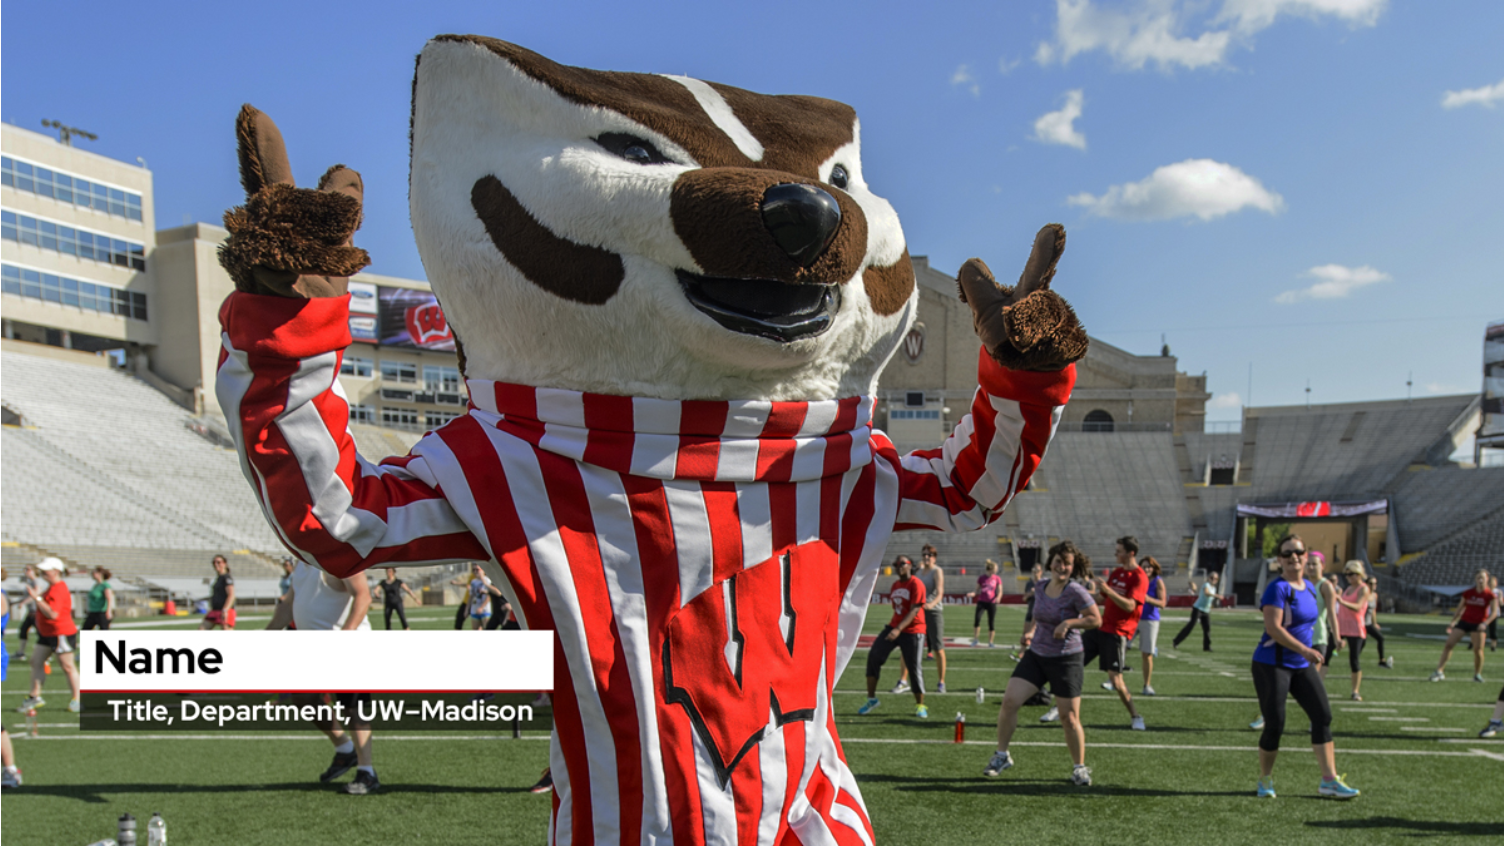 Video still featuring Bucky Badger and a lower third text graphic that reads "Buckingham U. Badger, UW–Madison’s famous mascot"